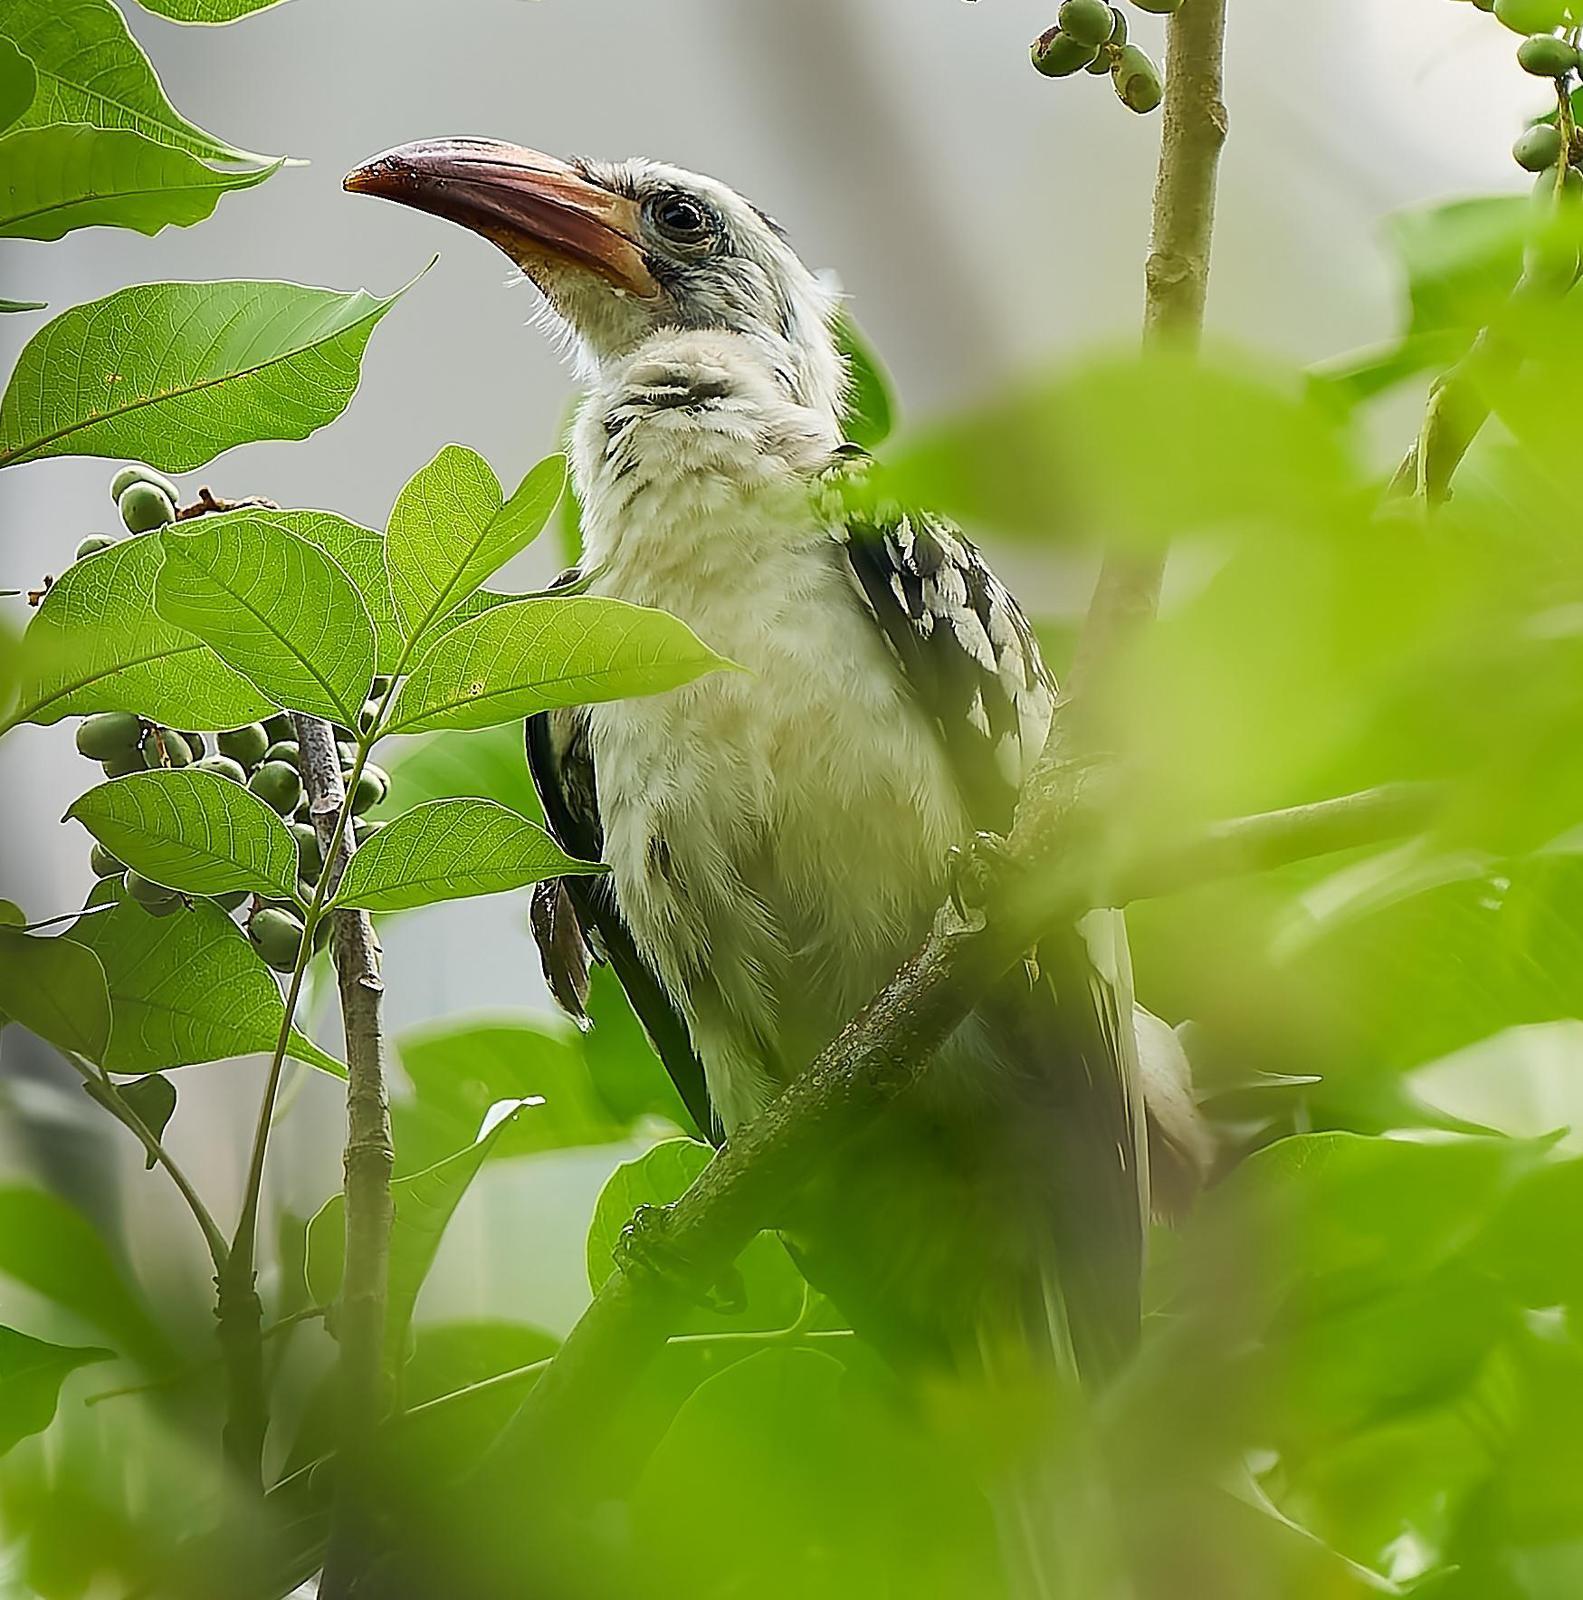 Northern Red-billed Hornbill Photo by Steven Cheong